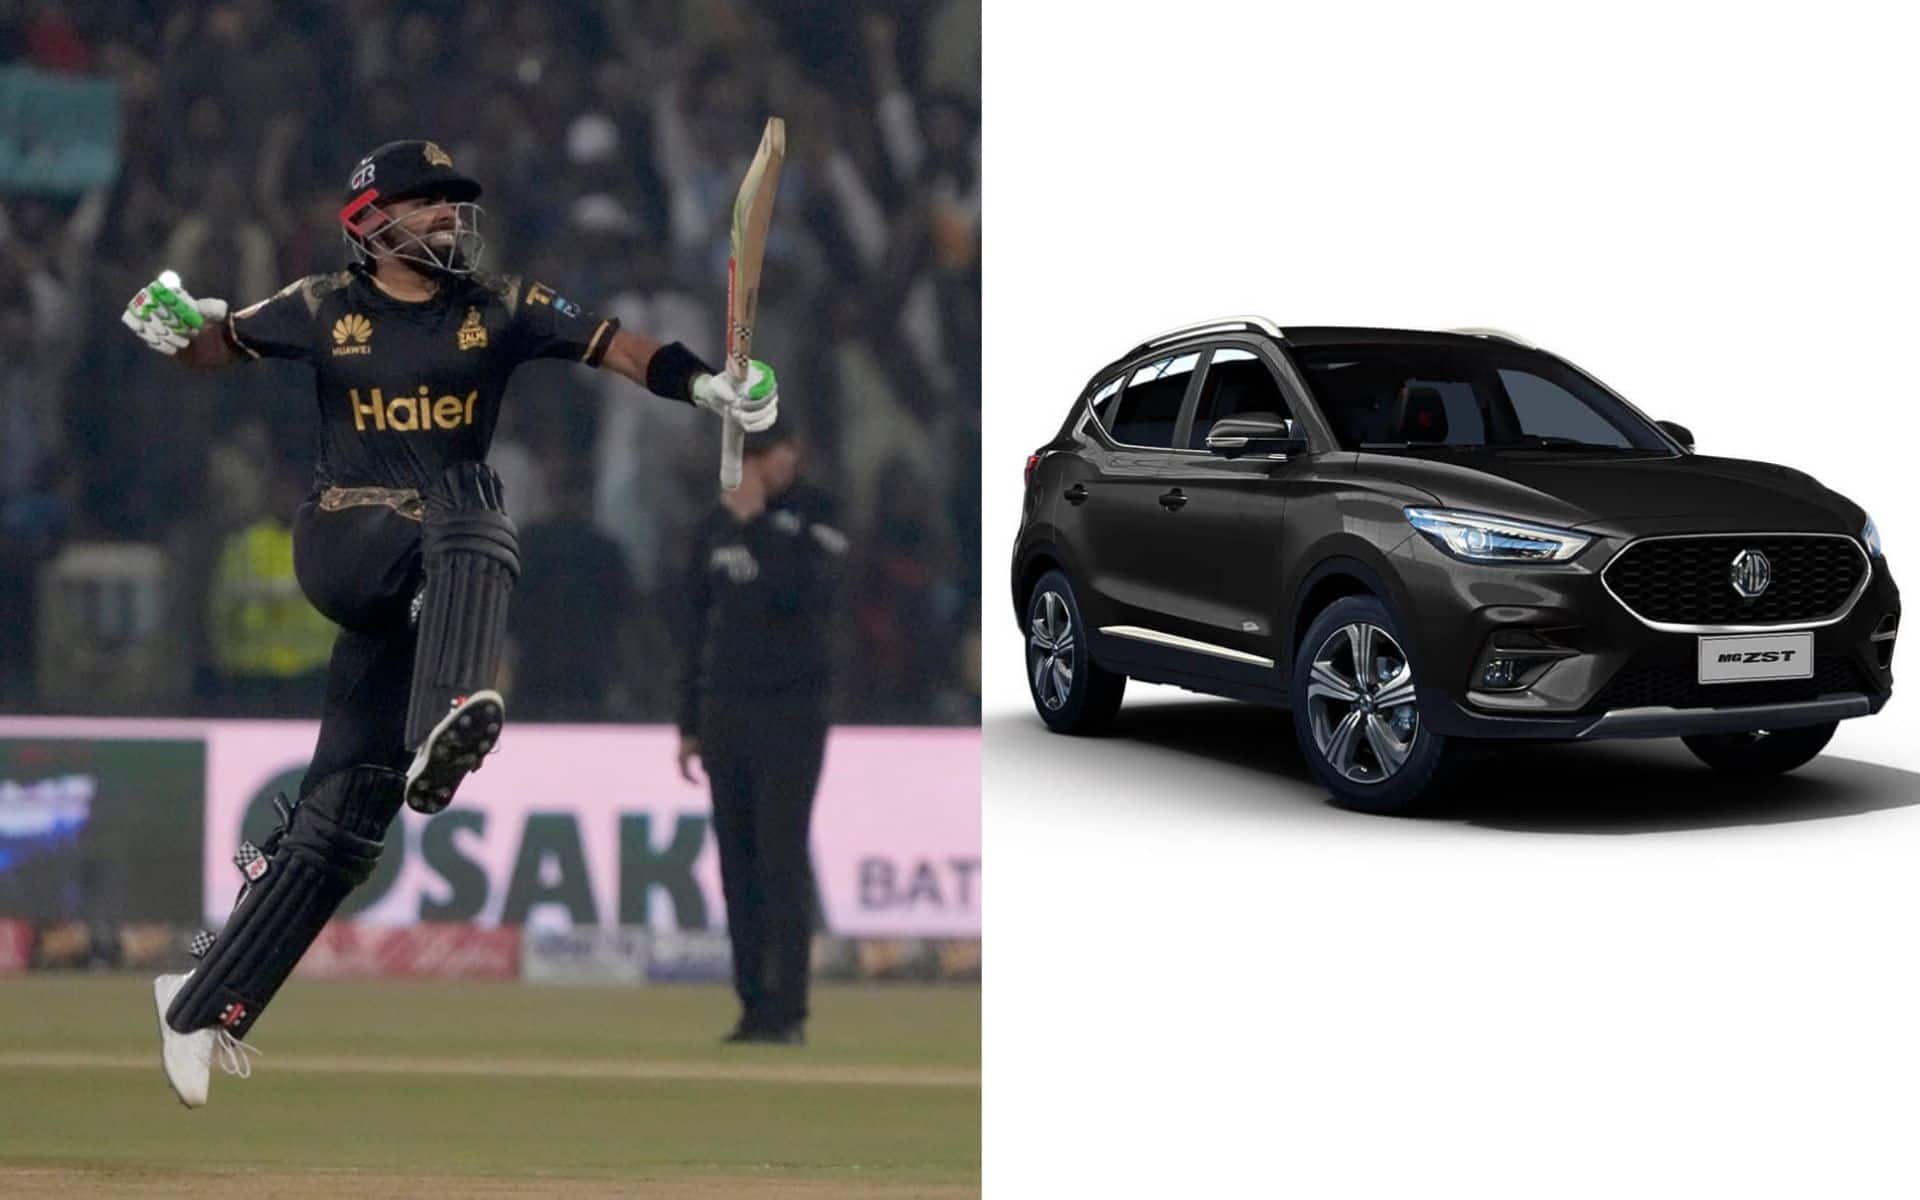 PSL Owner Gifts Babar Azam A Limited Edition Car That Is Not Available In India